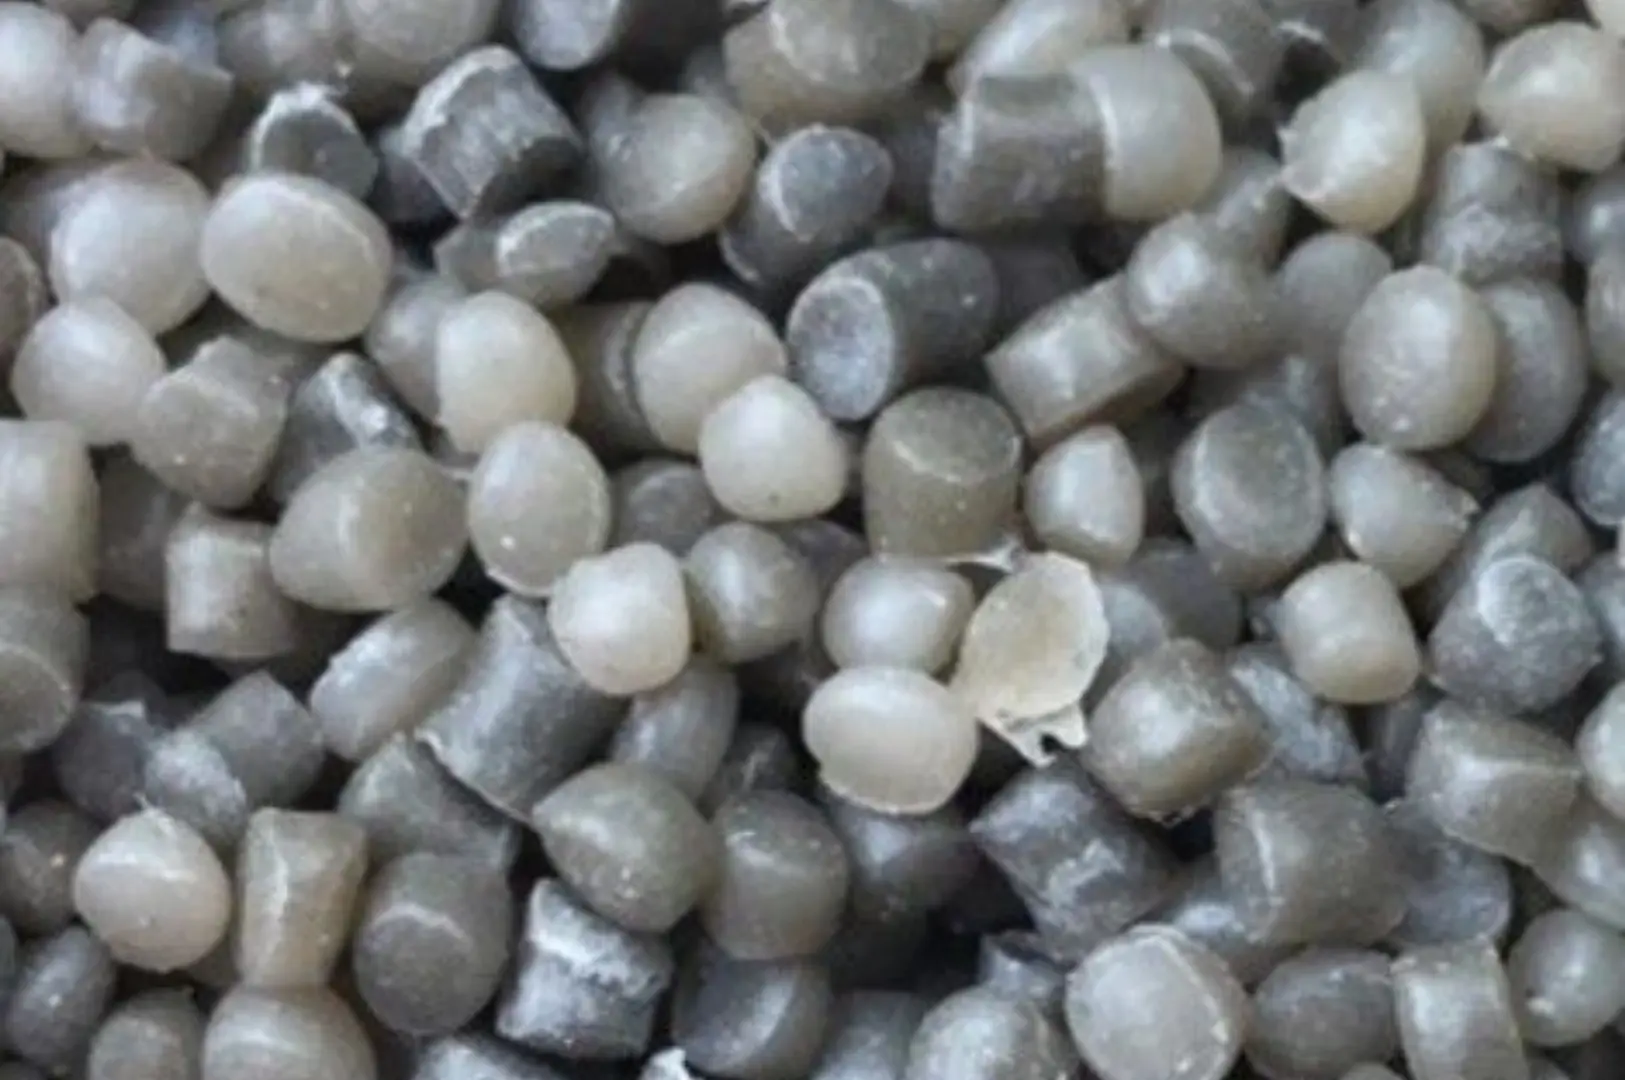 A close up of some grey and white beads